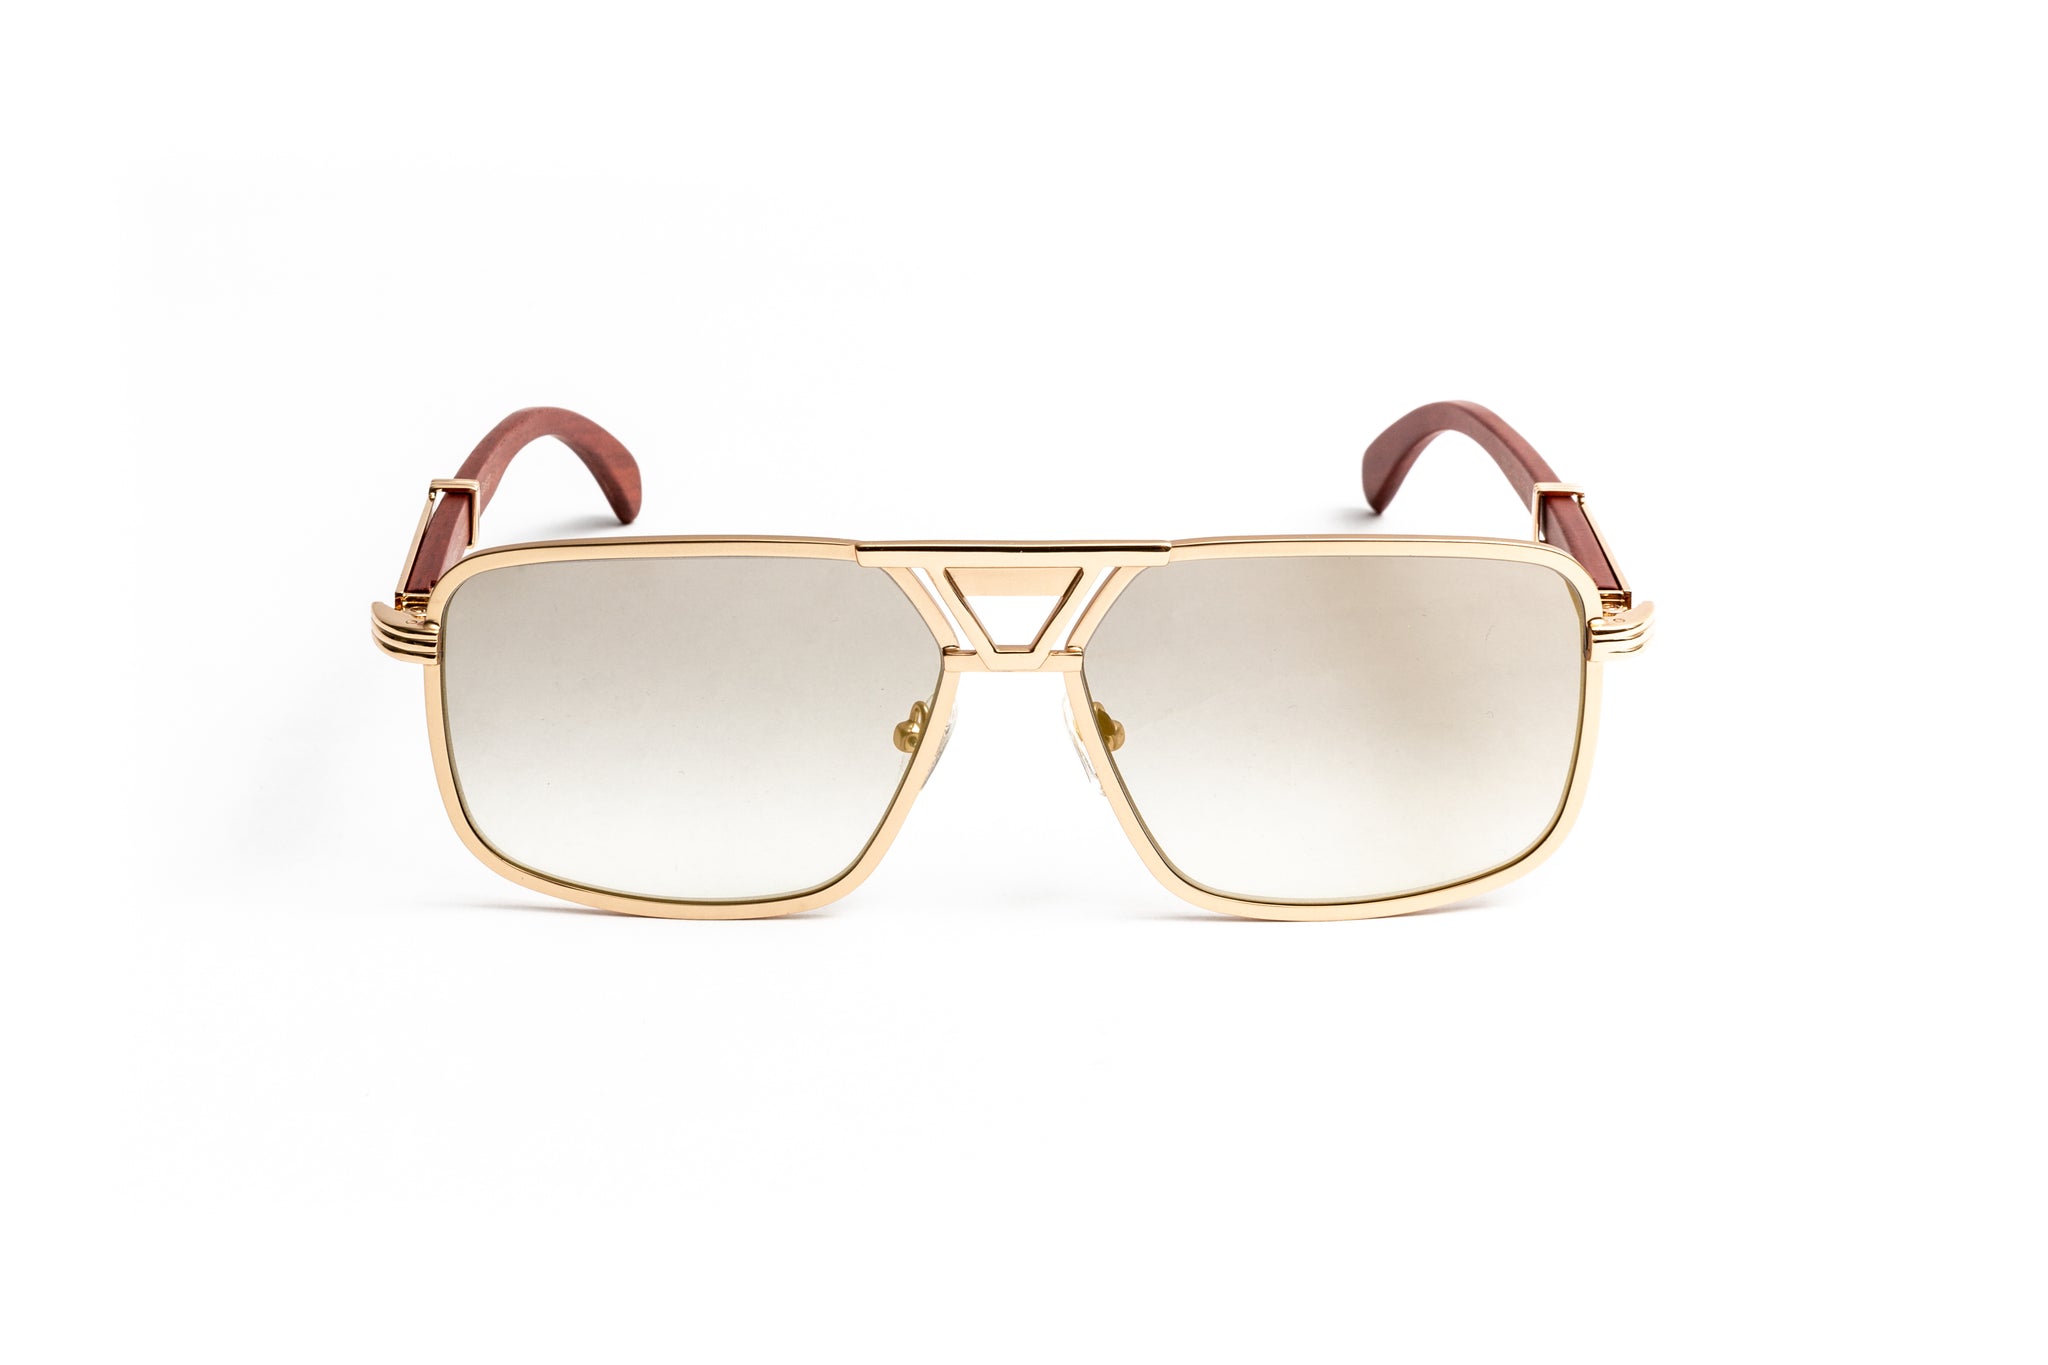 Premiere-de-Cartier style men's aviator 18kt gold and brown cherry wood sunglasses with gradient grey and gold mirror lenses by Vintage Wood Collection